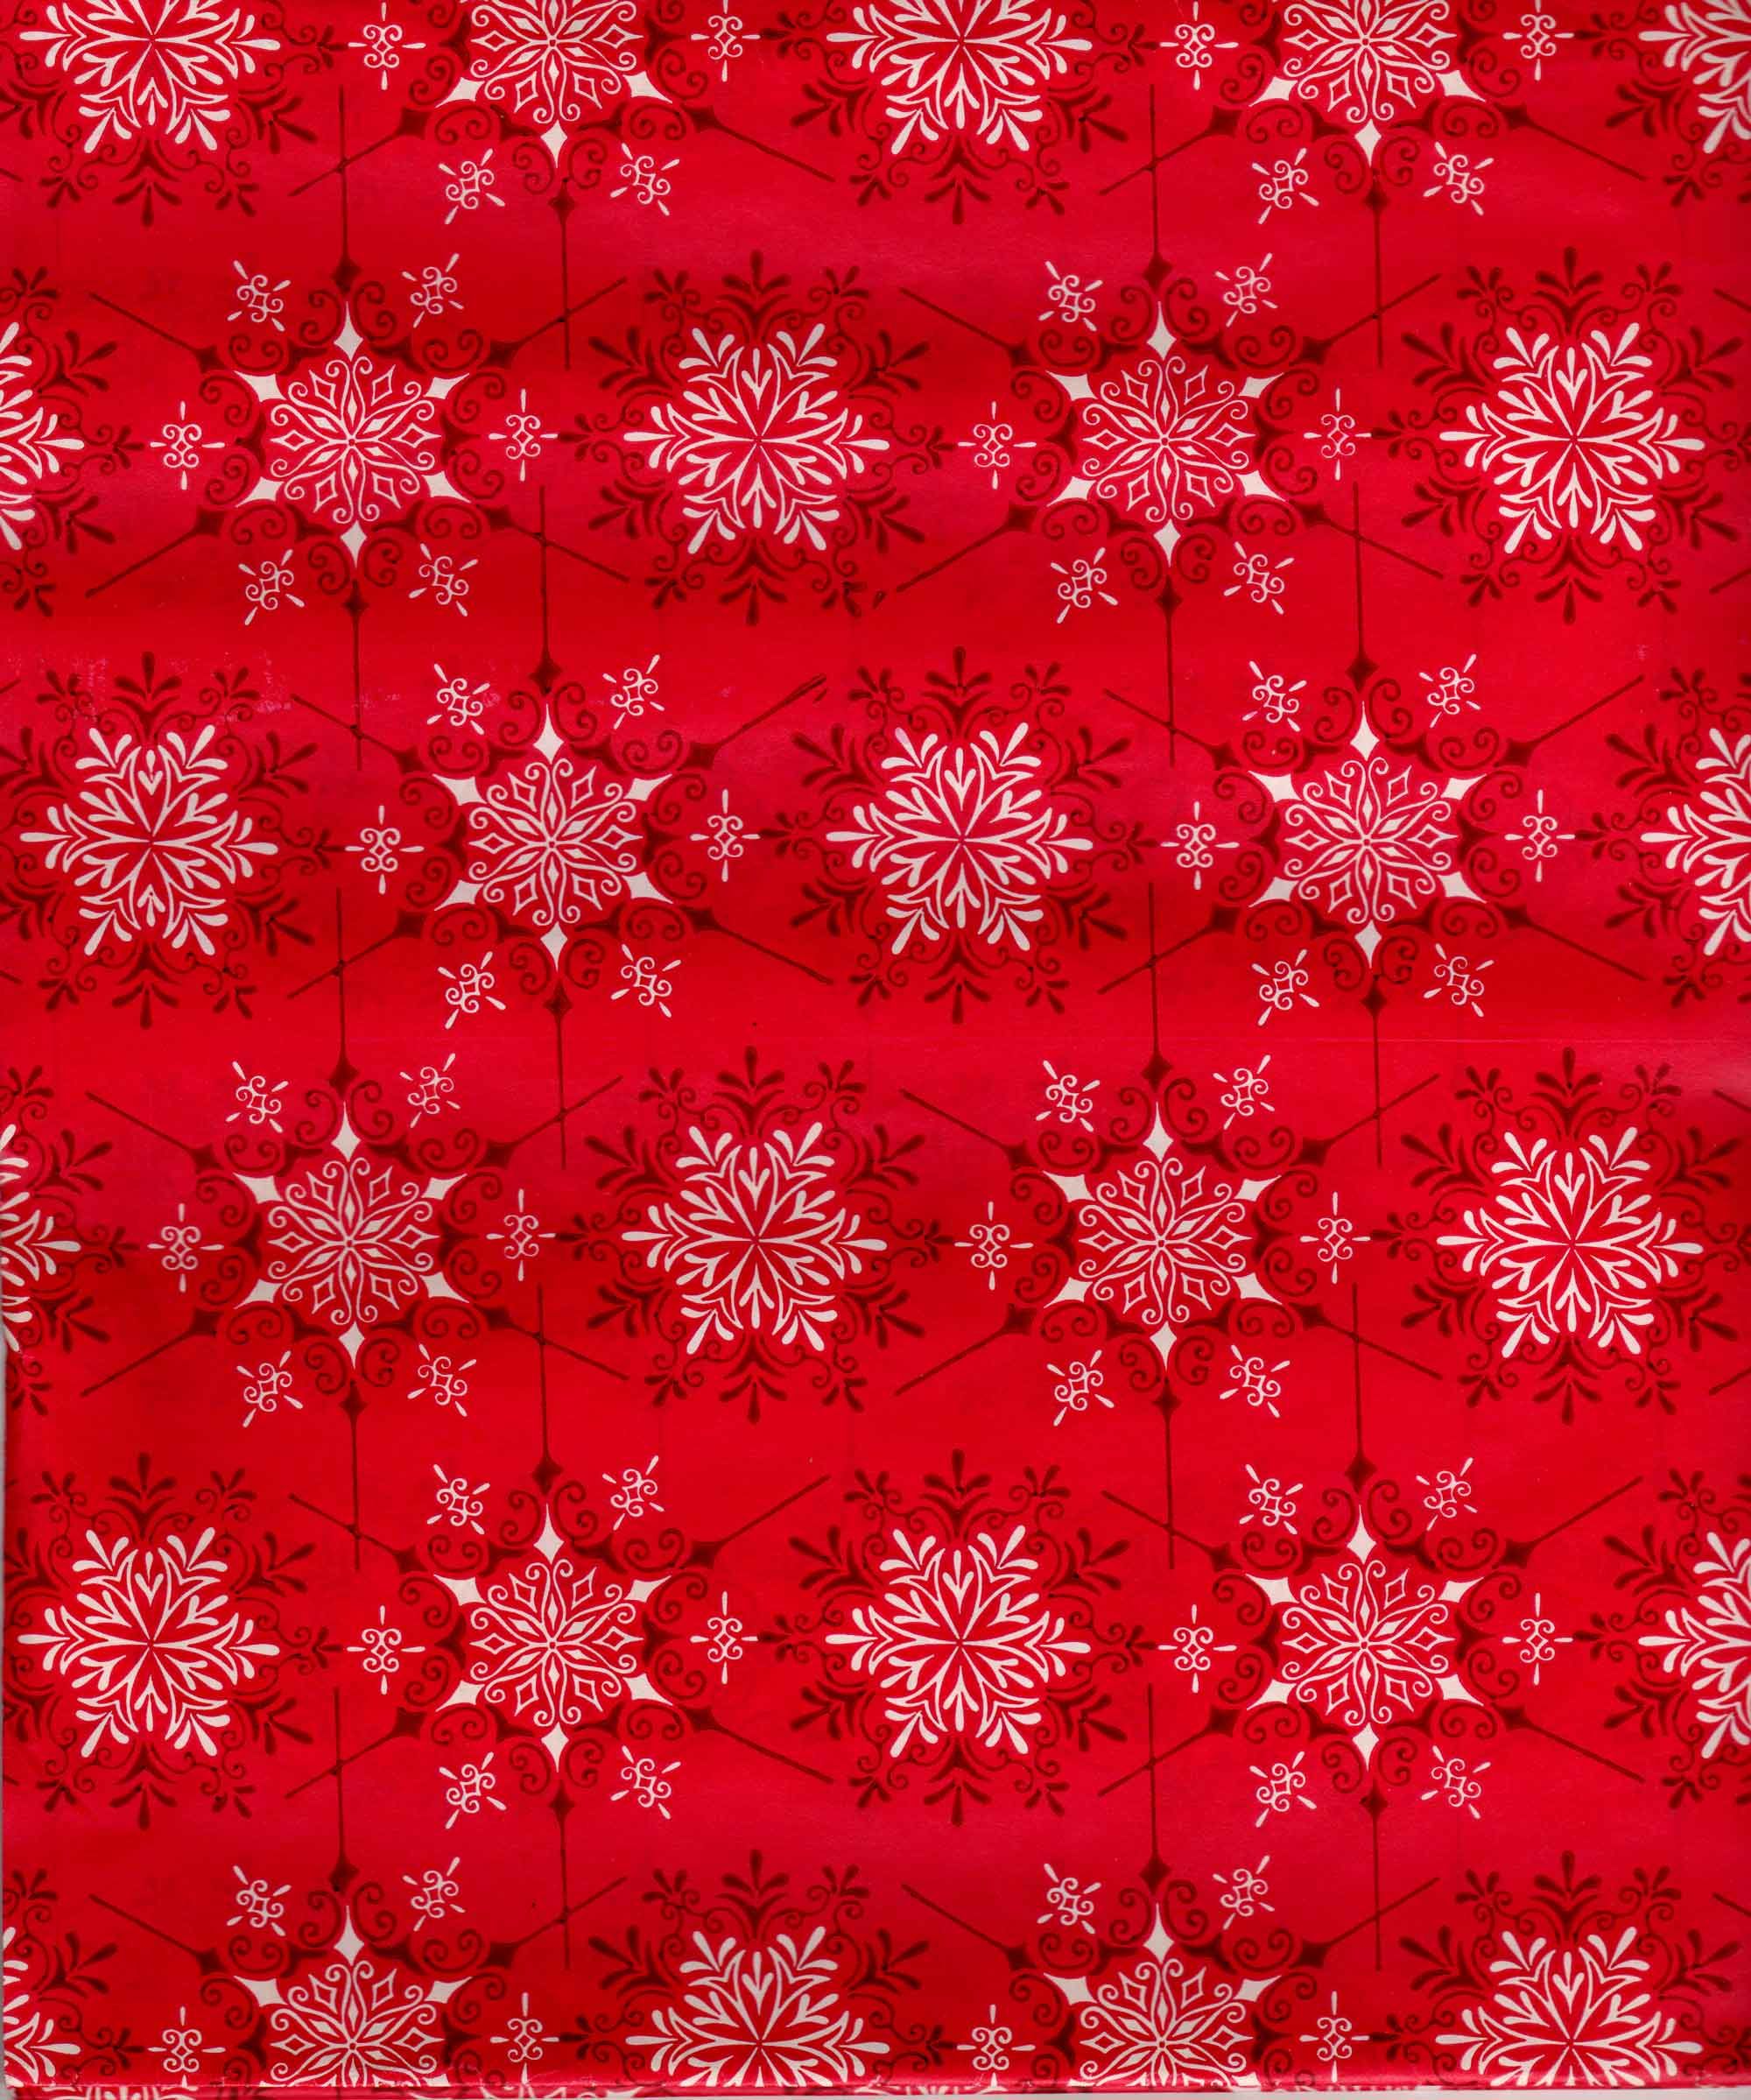 wrapping paper wallpaper,pattern,red,snowflake,design,textile